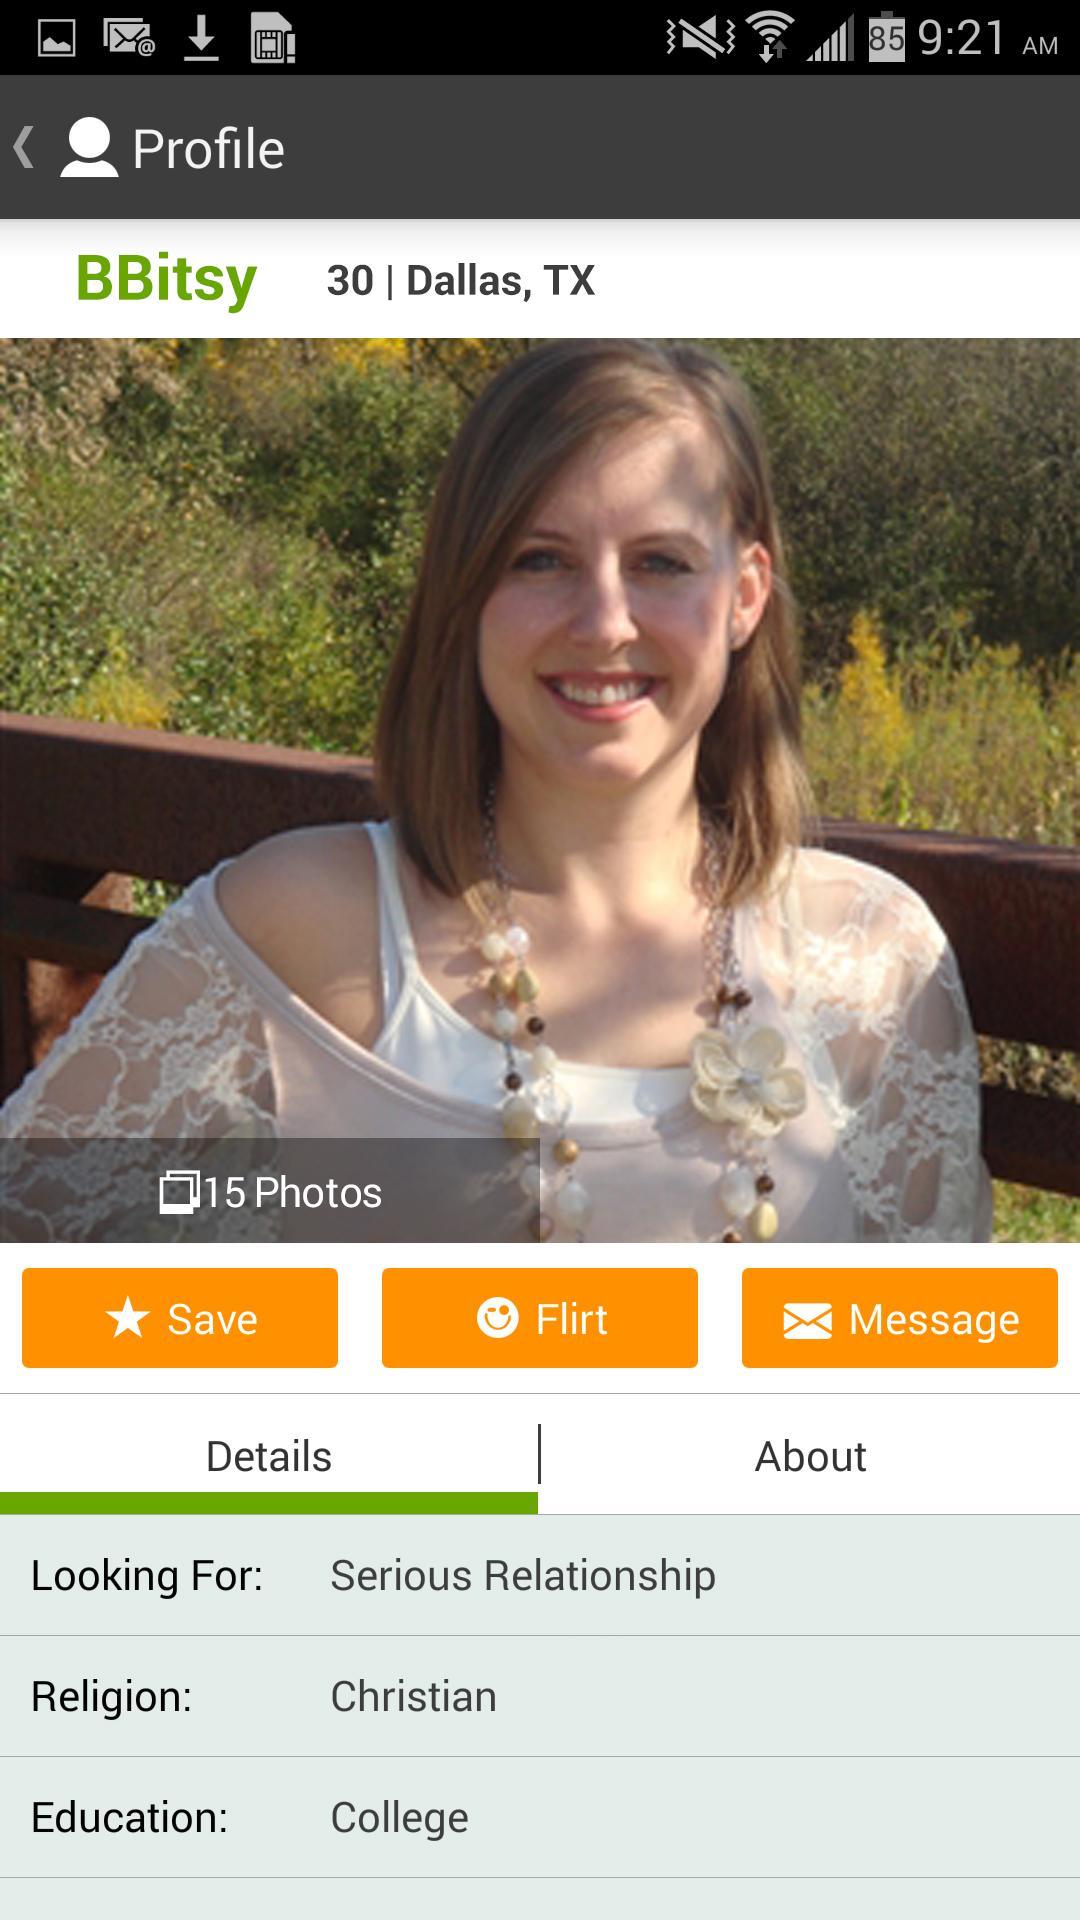 Profile description. Dating profile. Peelo dating sites. Dating app for parents.